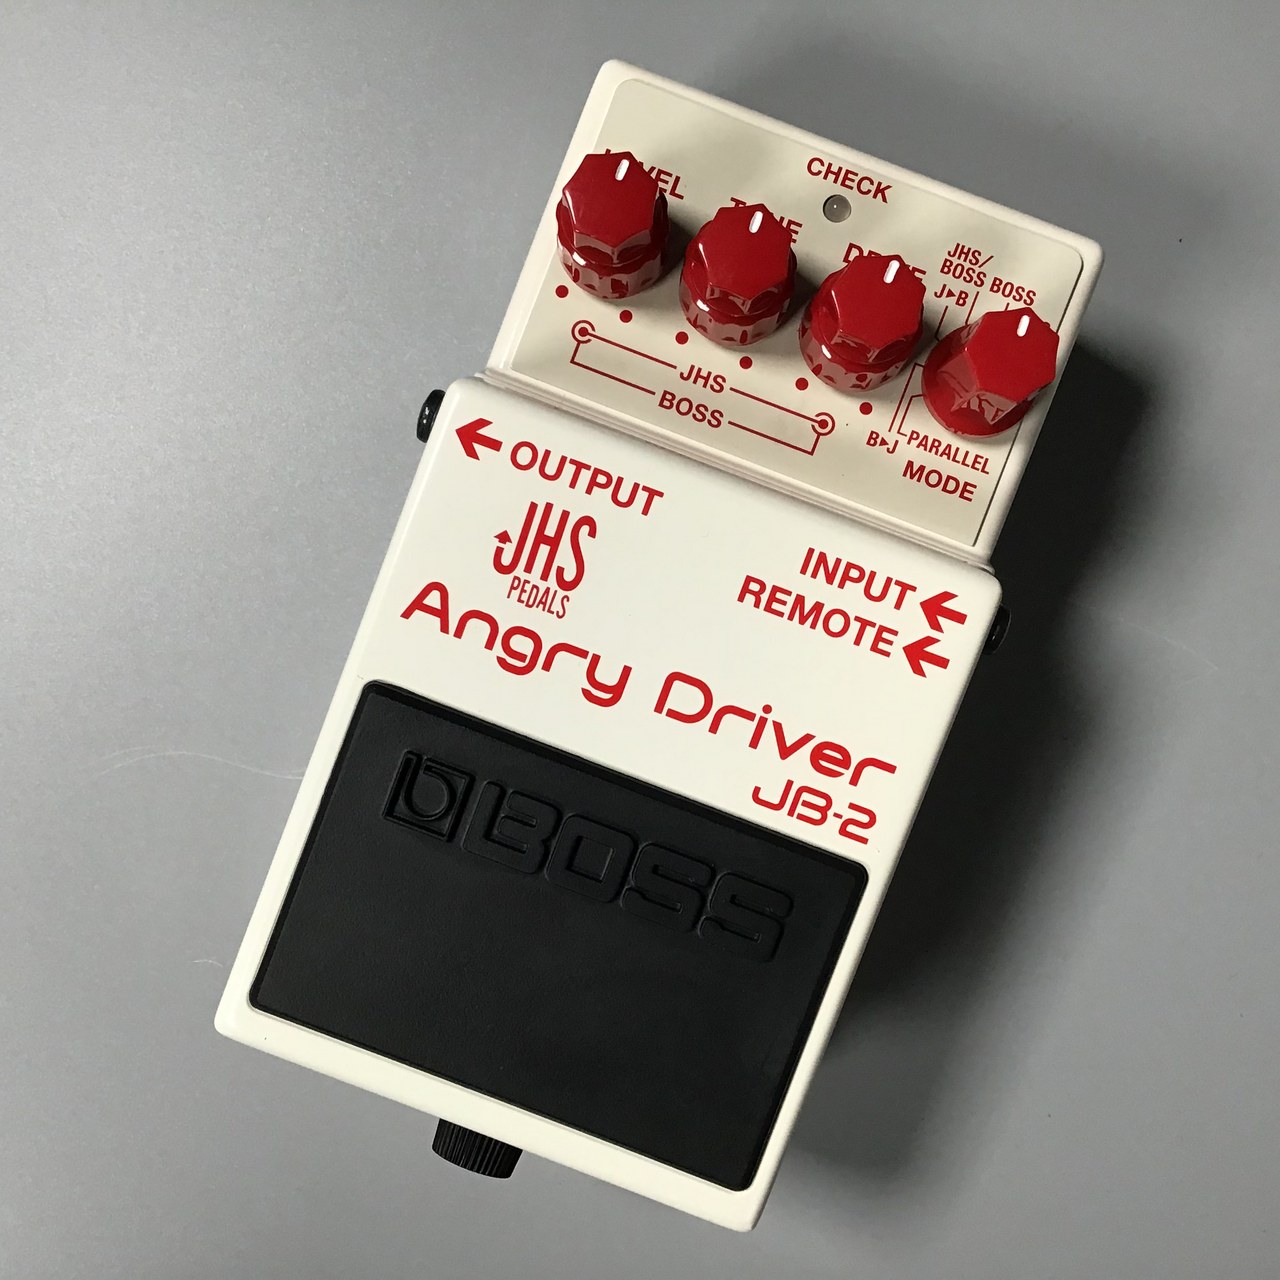 BOSS JB-2 jhs pedals Angry Driver www.krzysztofbialy.com